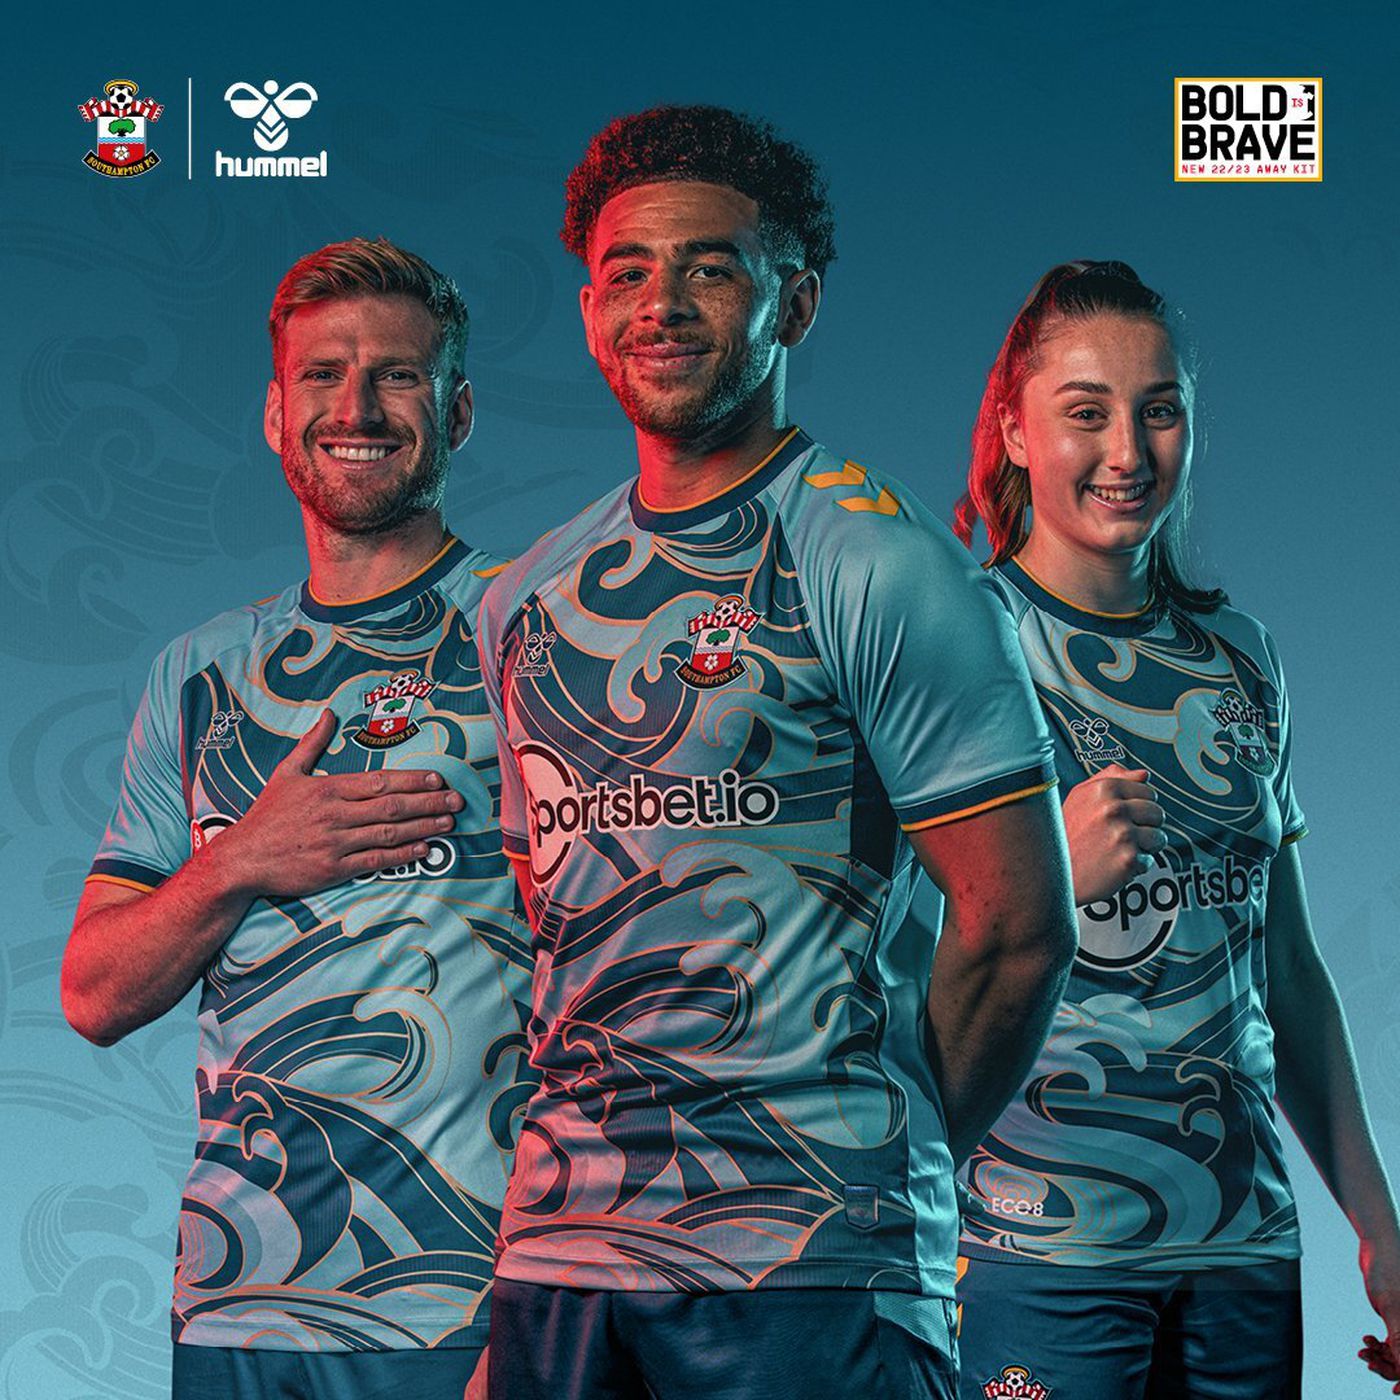 Industrialize deposit pop Southampton reveals 'bold' away kit for 2022/23 - St. Mary's Musings